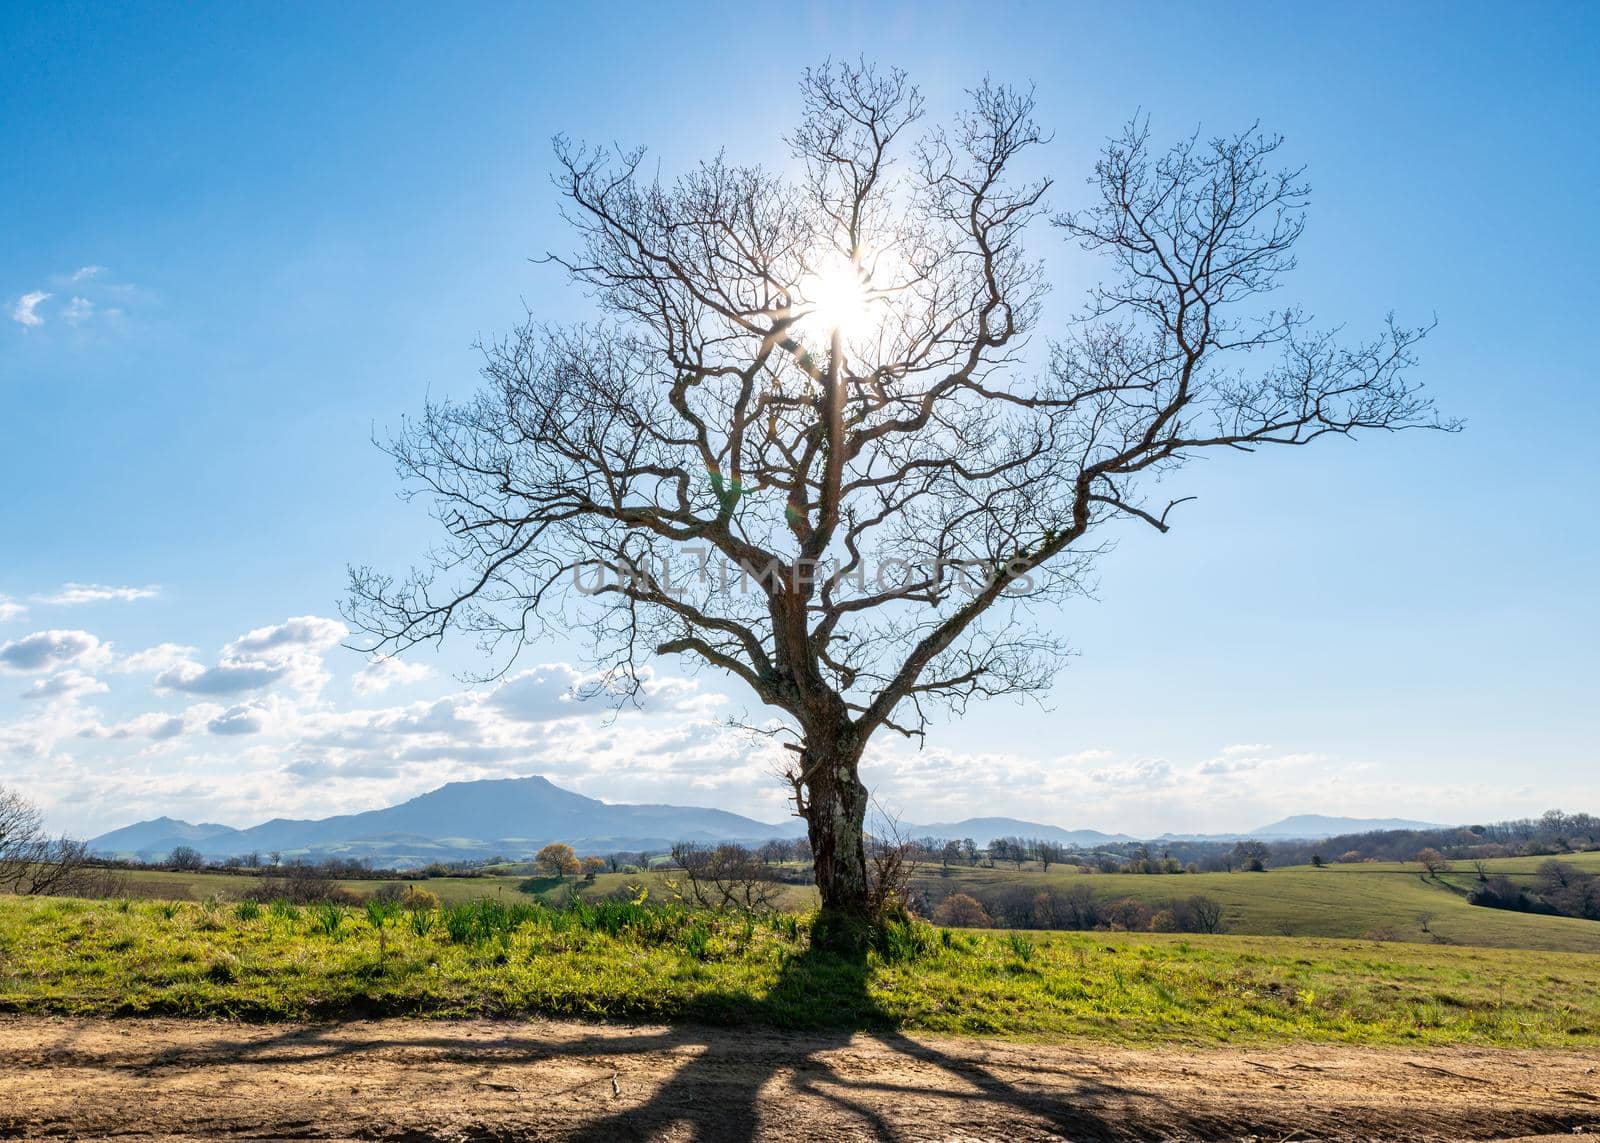 A single leafless tree in winter backlit by the sun, La Rhune mountain in the background, French Basque country, France